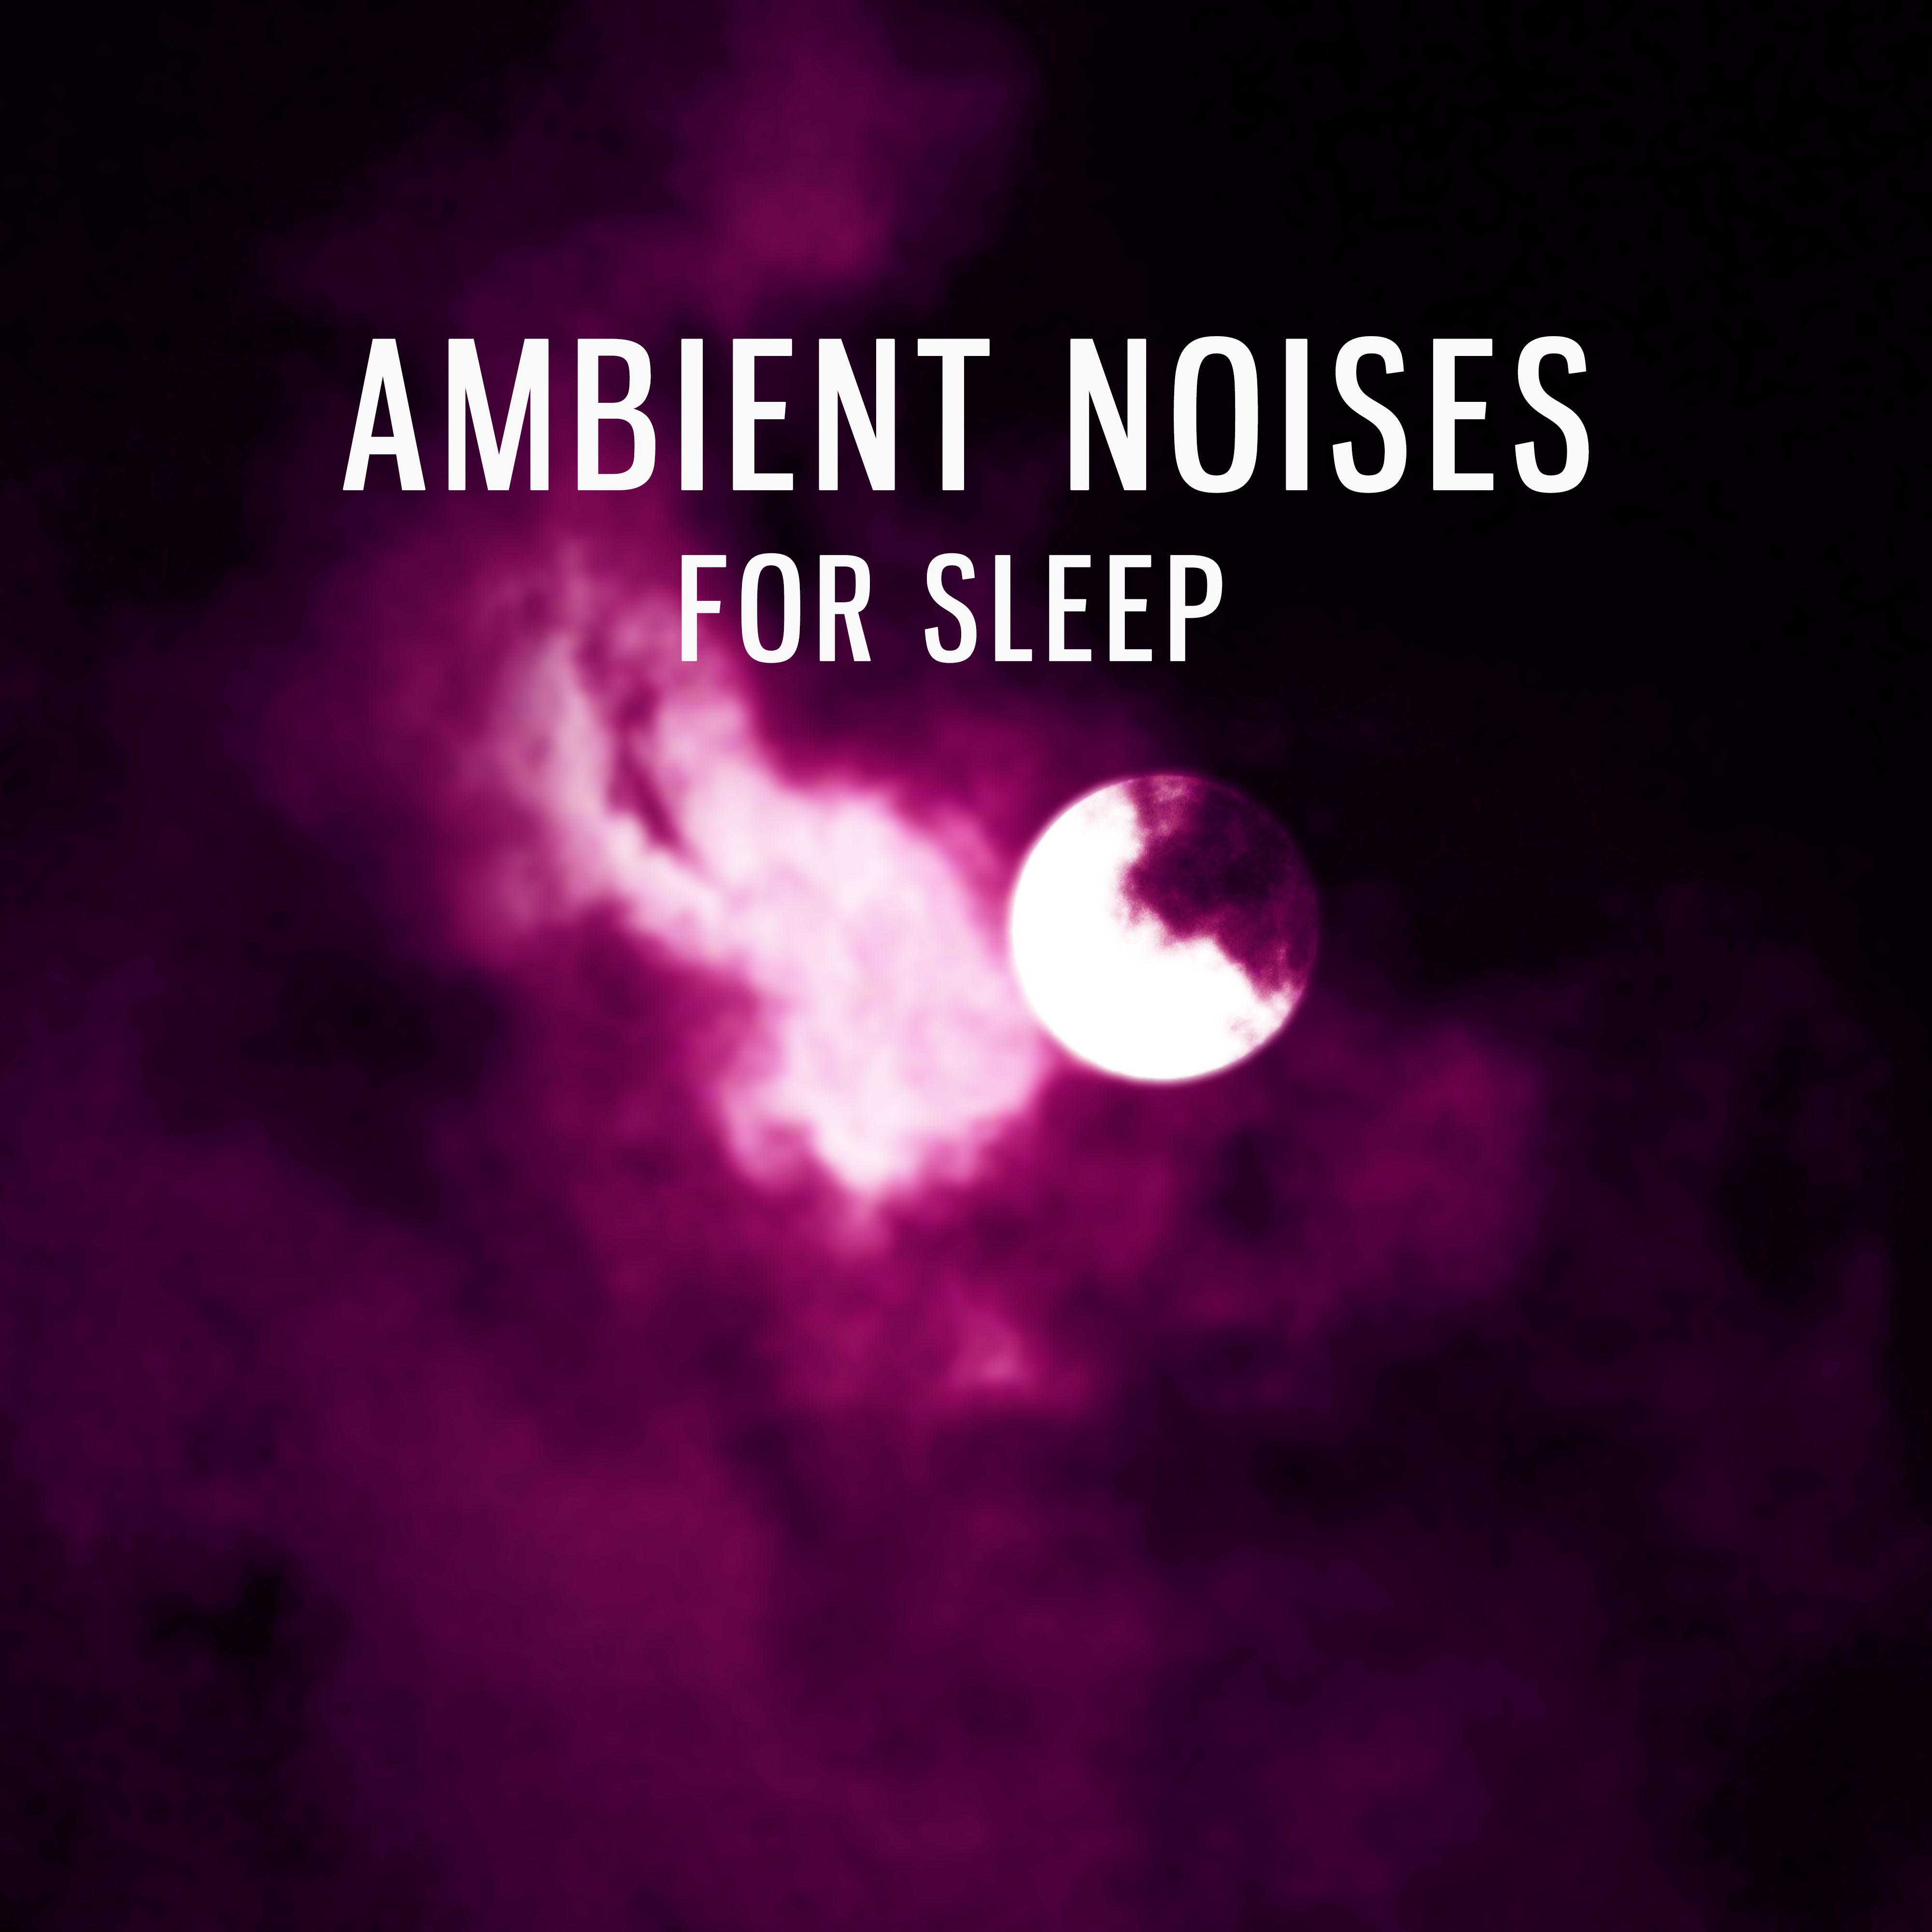 Ambient Noises for Sleep  Best New Age Music for Sleep, Insomnia Cure, Sleep Disorder, Healing Sounds